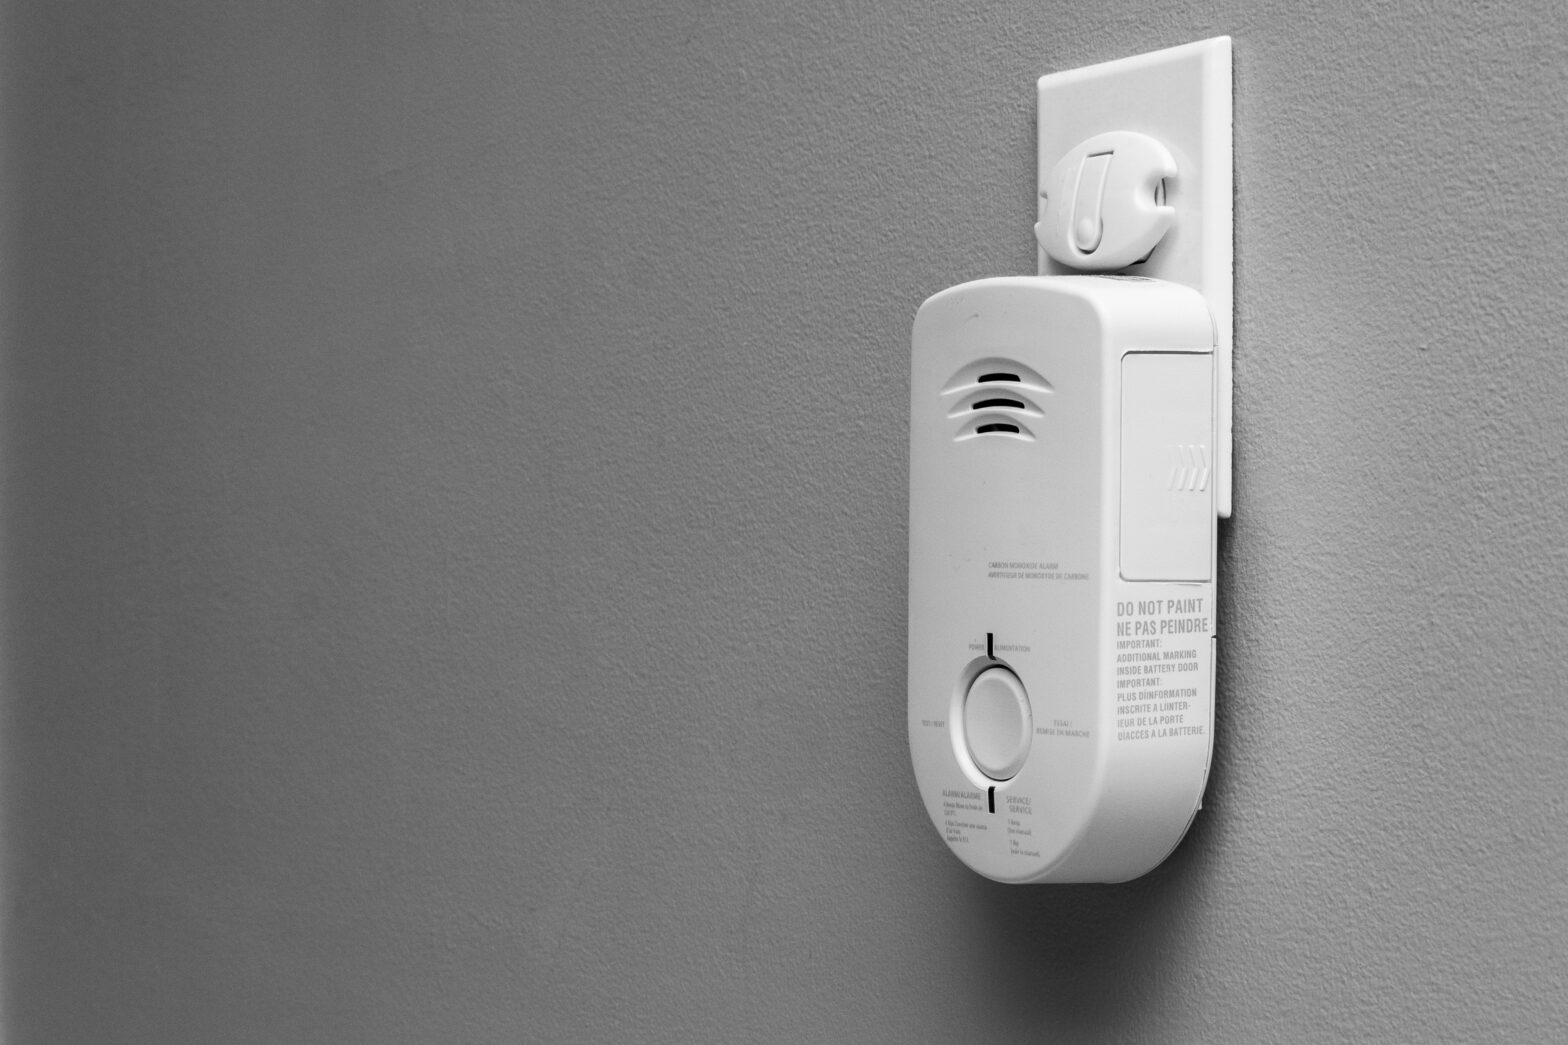 How to Protect Against Carbon Monoxide in Your Home